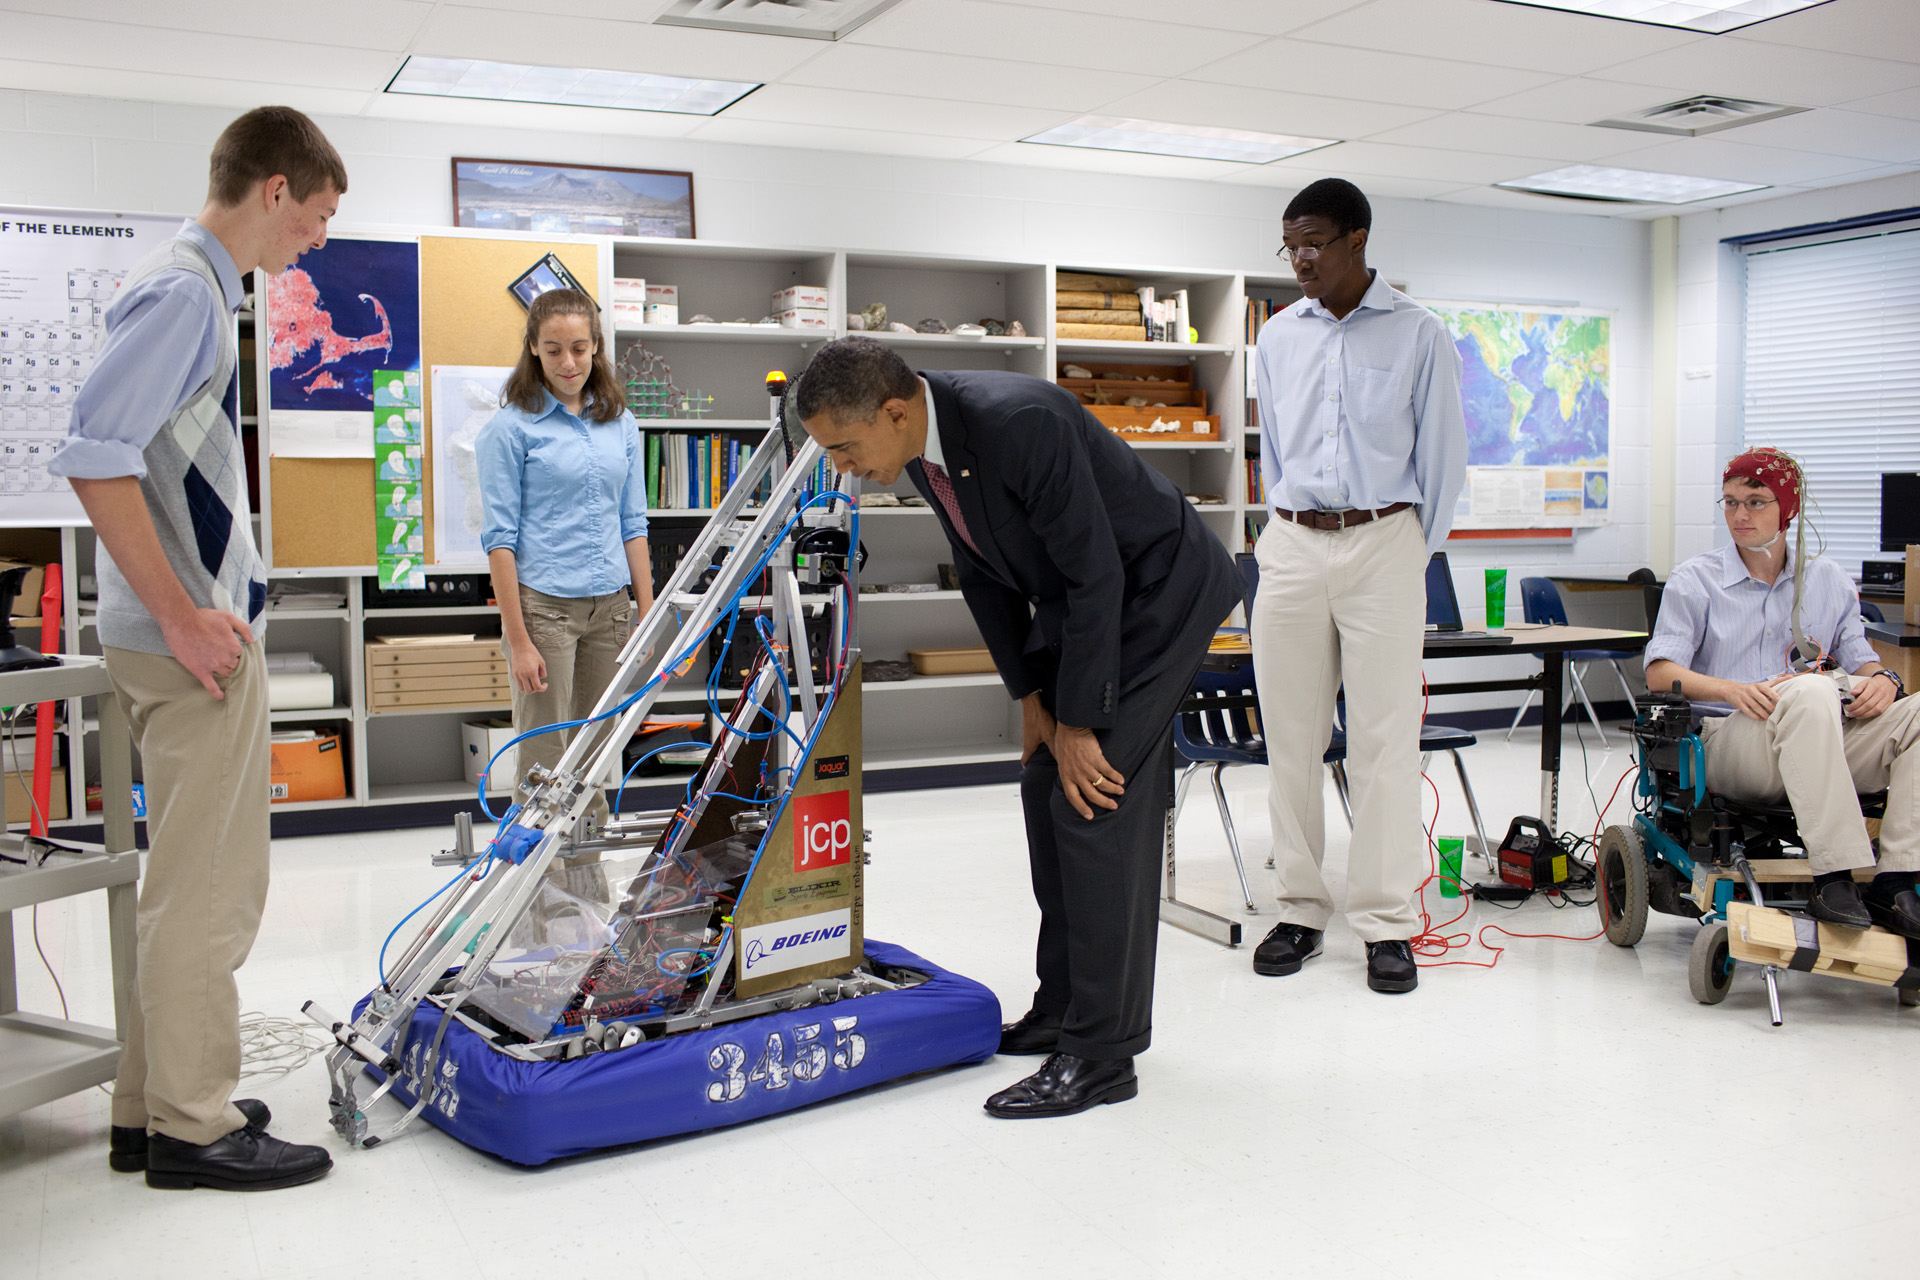 President Obama at Thomas Jefferson High School for Science and Technology